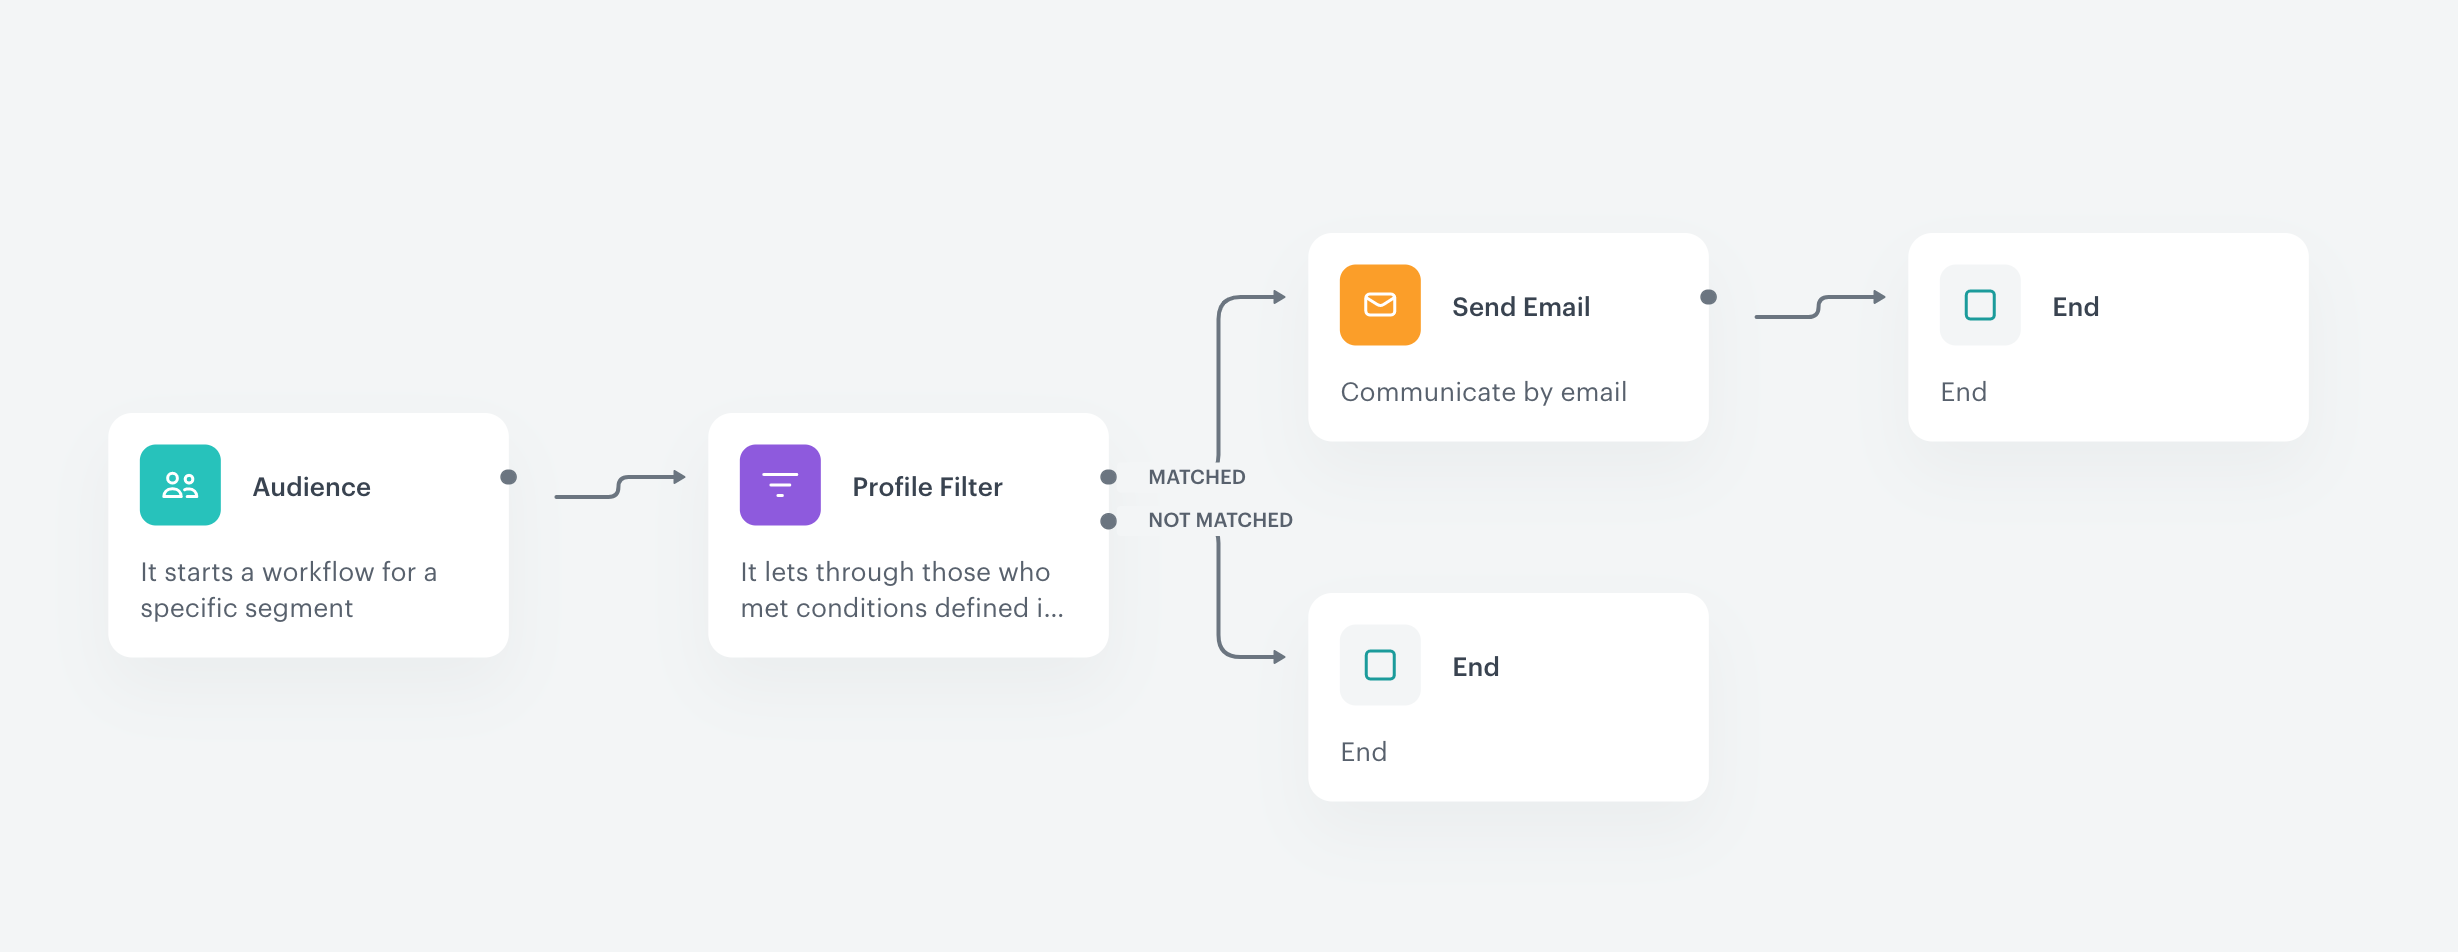 The final configuration of a workflow that sends an email 14 days before birthday